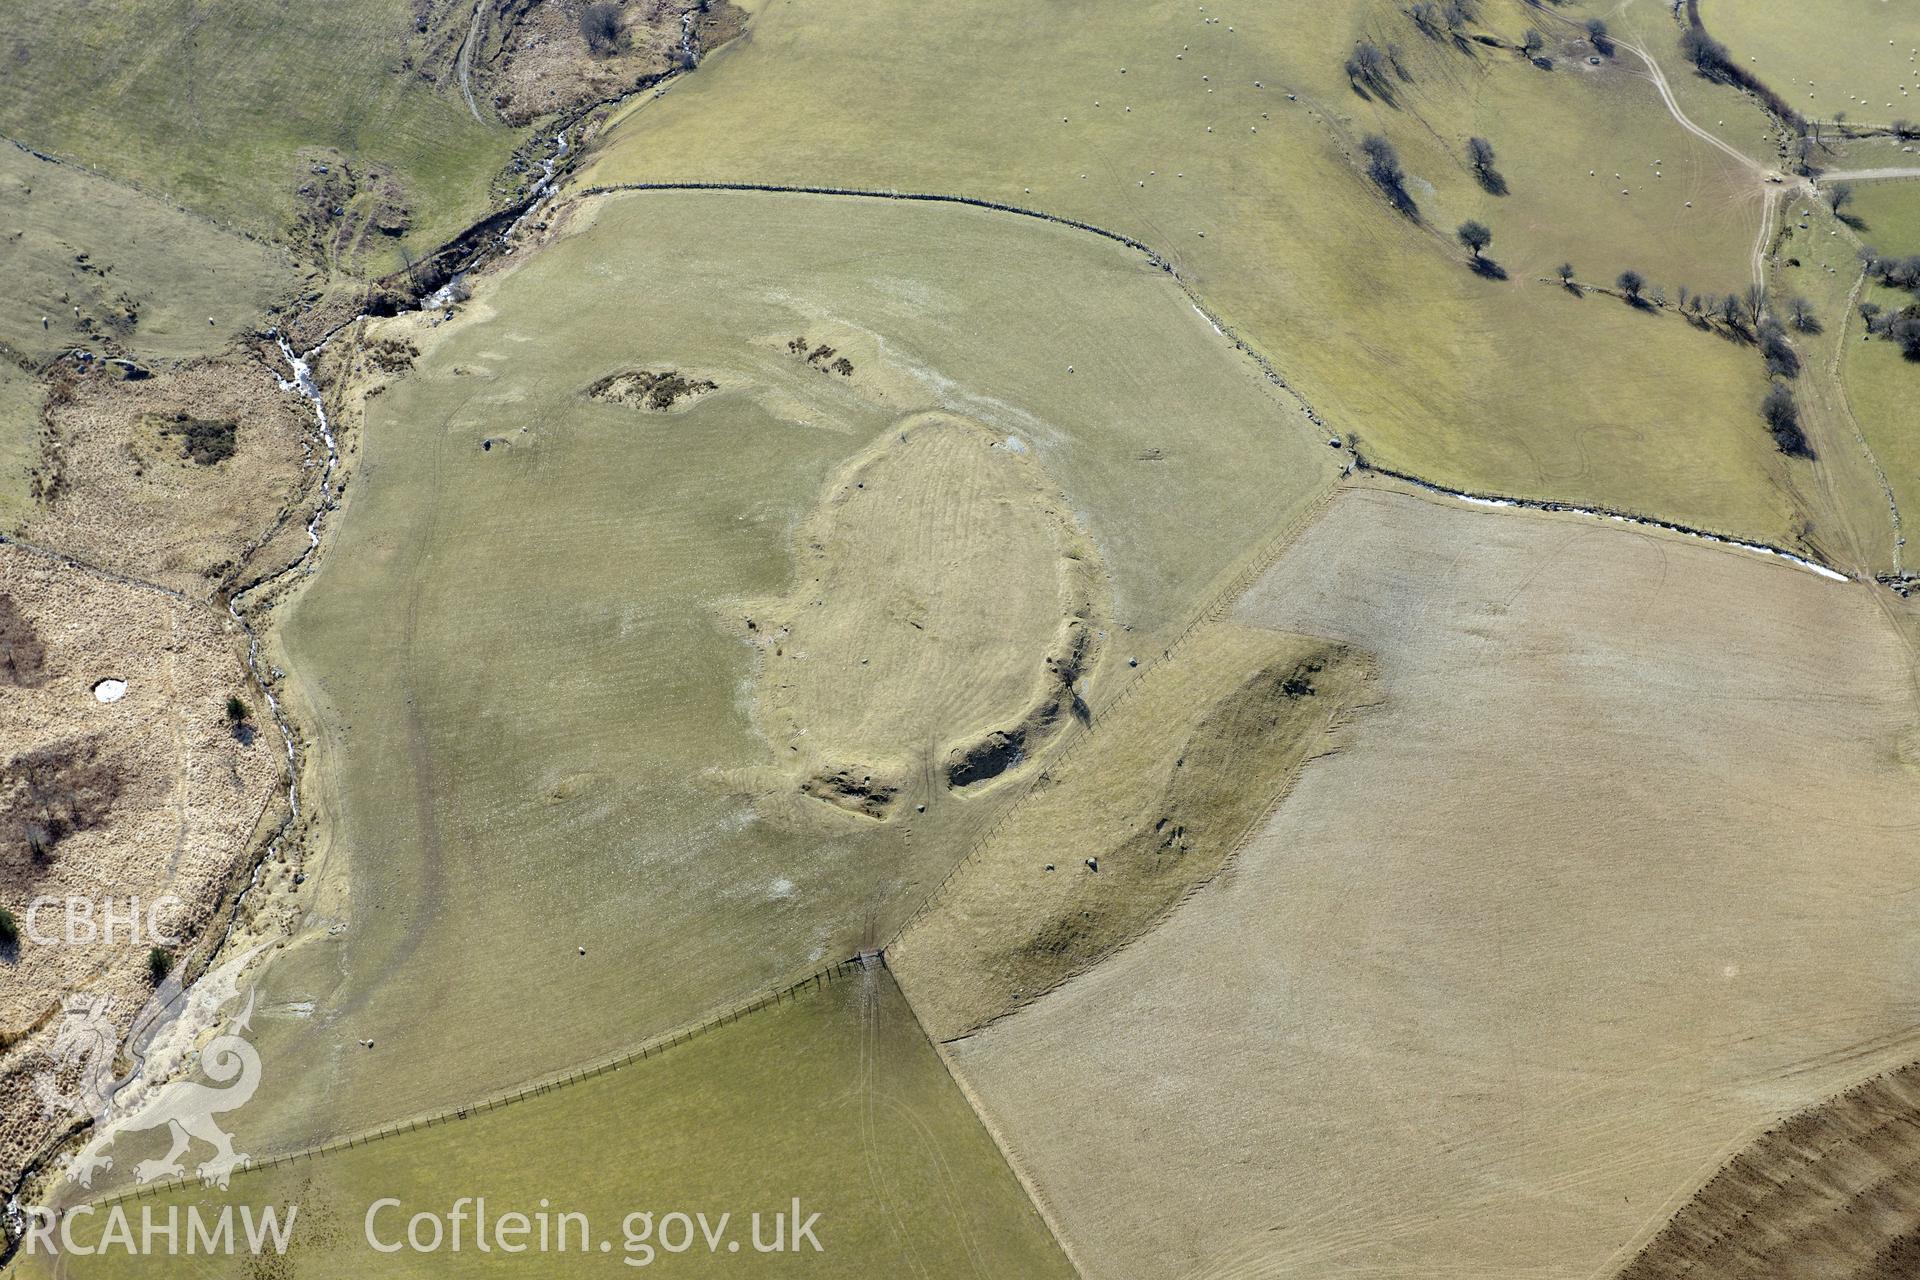 Pen y Castell hillfort, Salem, north east of Aberystwyth. Oblique aerial photograph taken during the Royal Commission's programme of archaeological aerial reconnaissance by Toby Driver on 2nd April 2013.